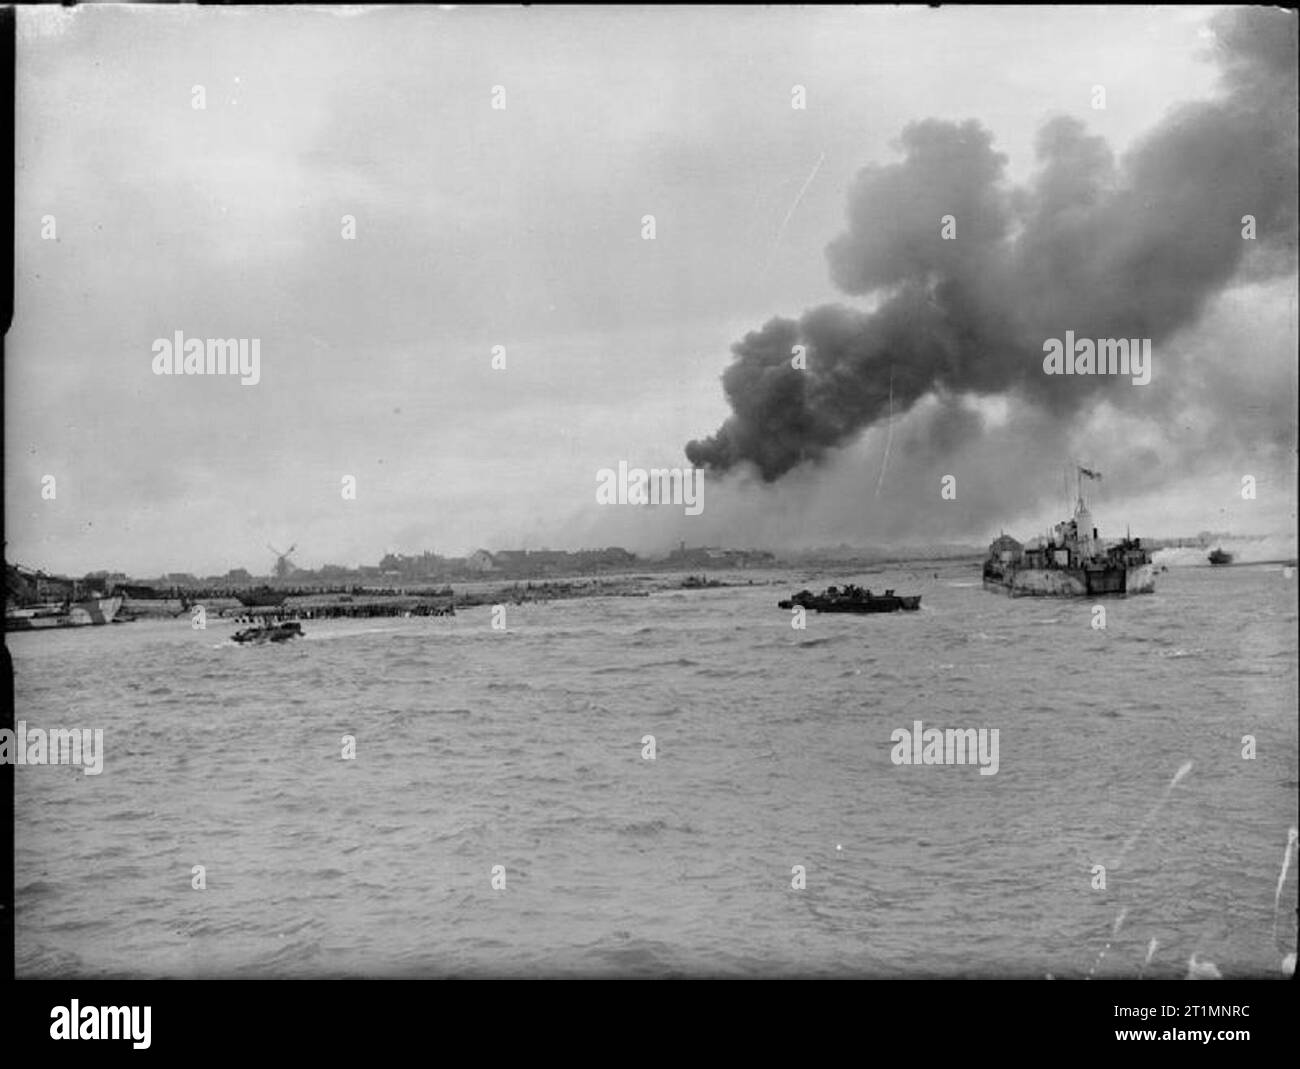 The Royal Navy during the Second World War DUKWs or 'Ducks' head towards the shore from a landing craft tank (LCT 952) whilst an Alligator personnel carrier can be seen on the beach. A large plume of smoke is rising high into the air from an enemy strongpoint on fire in the background during the landing by Royal Marine commandos on the island of Walcheren at Westkapelle, the most western point of the island, the final phase of the battle to free the Belgian port of Antwerp. Stock Photo